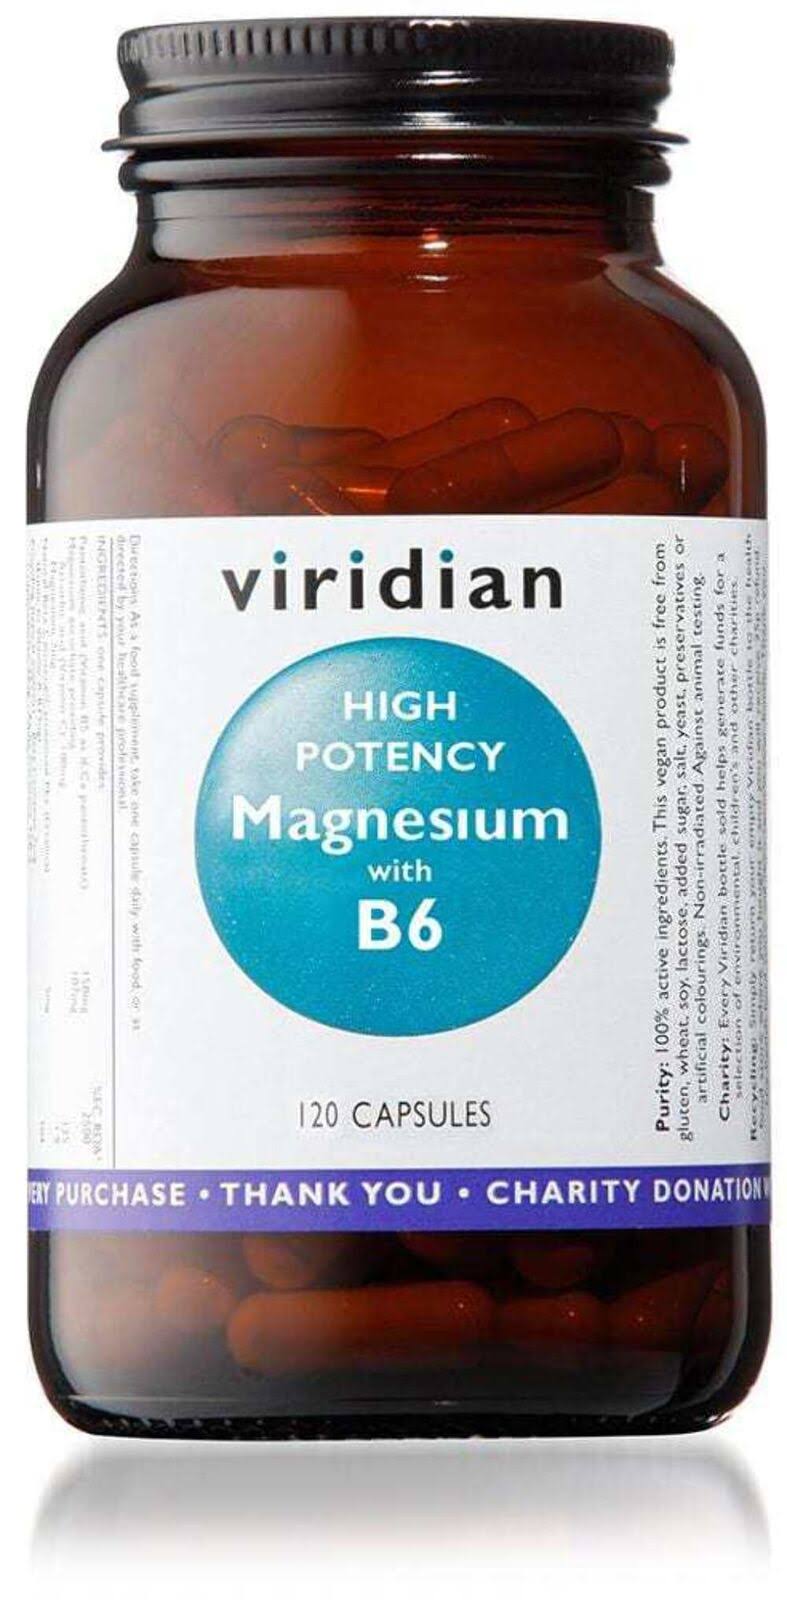 Viridian High Potency Magnesium with B6 - 120 Vegetable Capsules